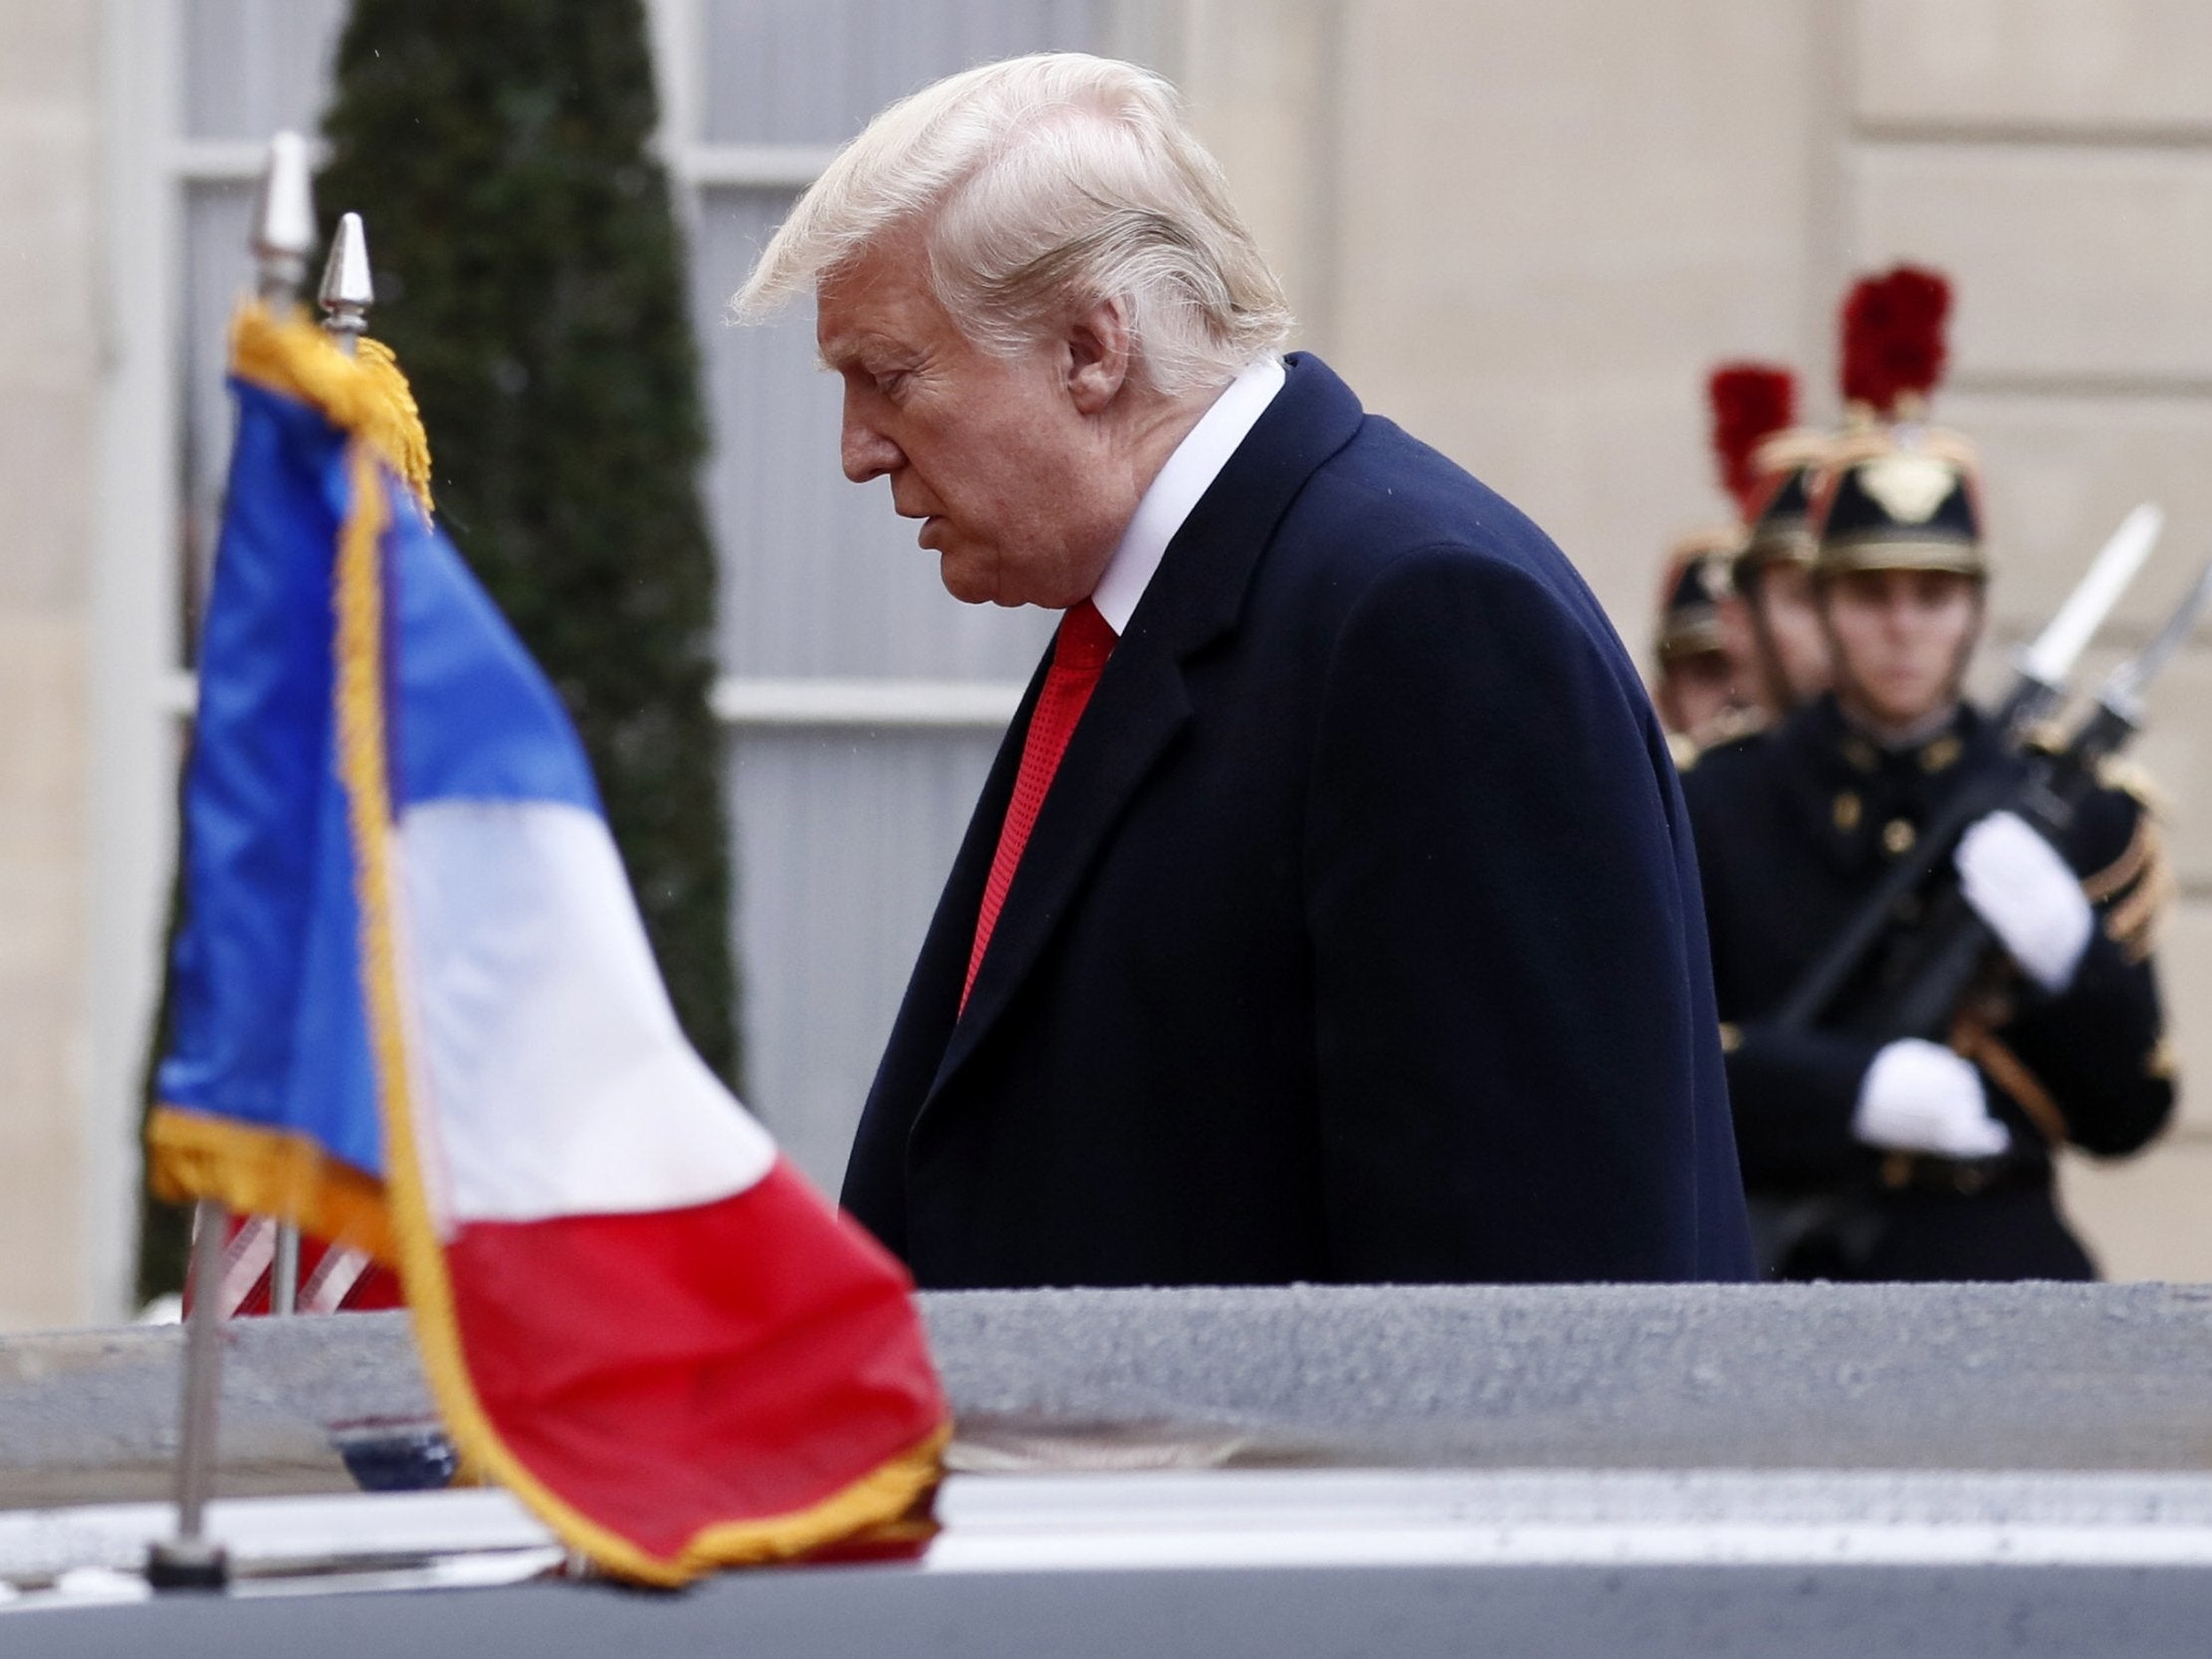 Remembrance Day - live: Donald Trump visits American cemetery in Paris and praises Emmanuel Macron